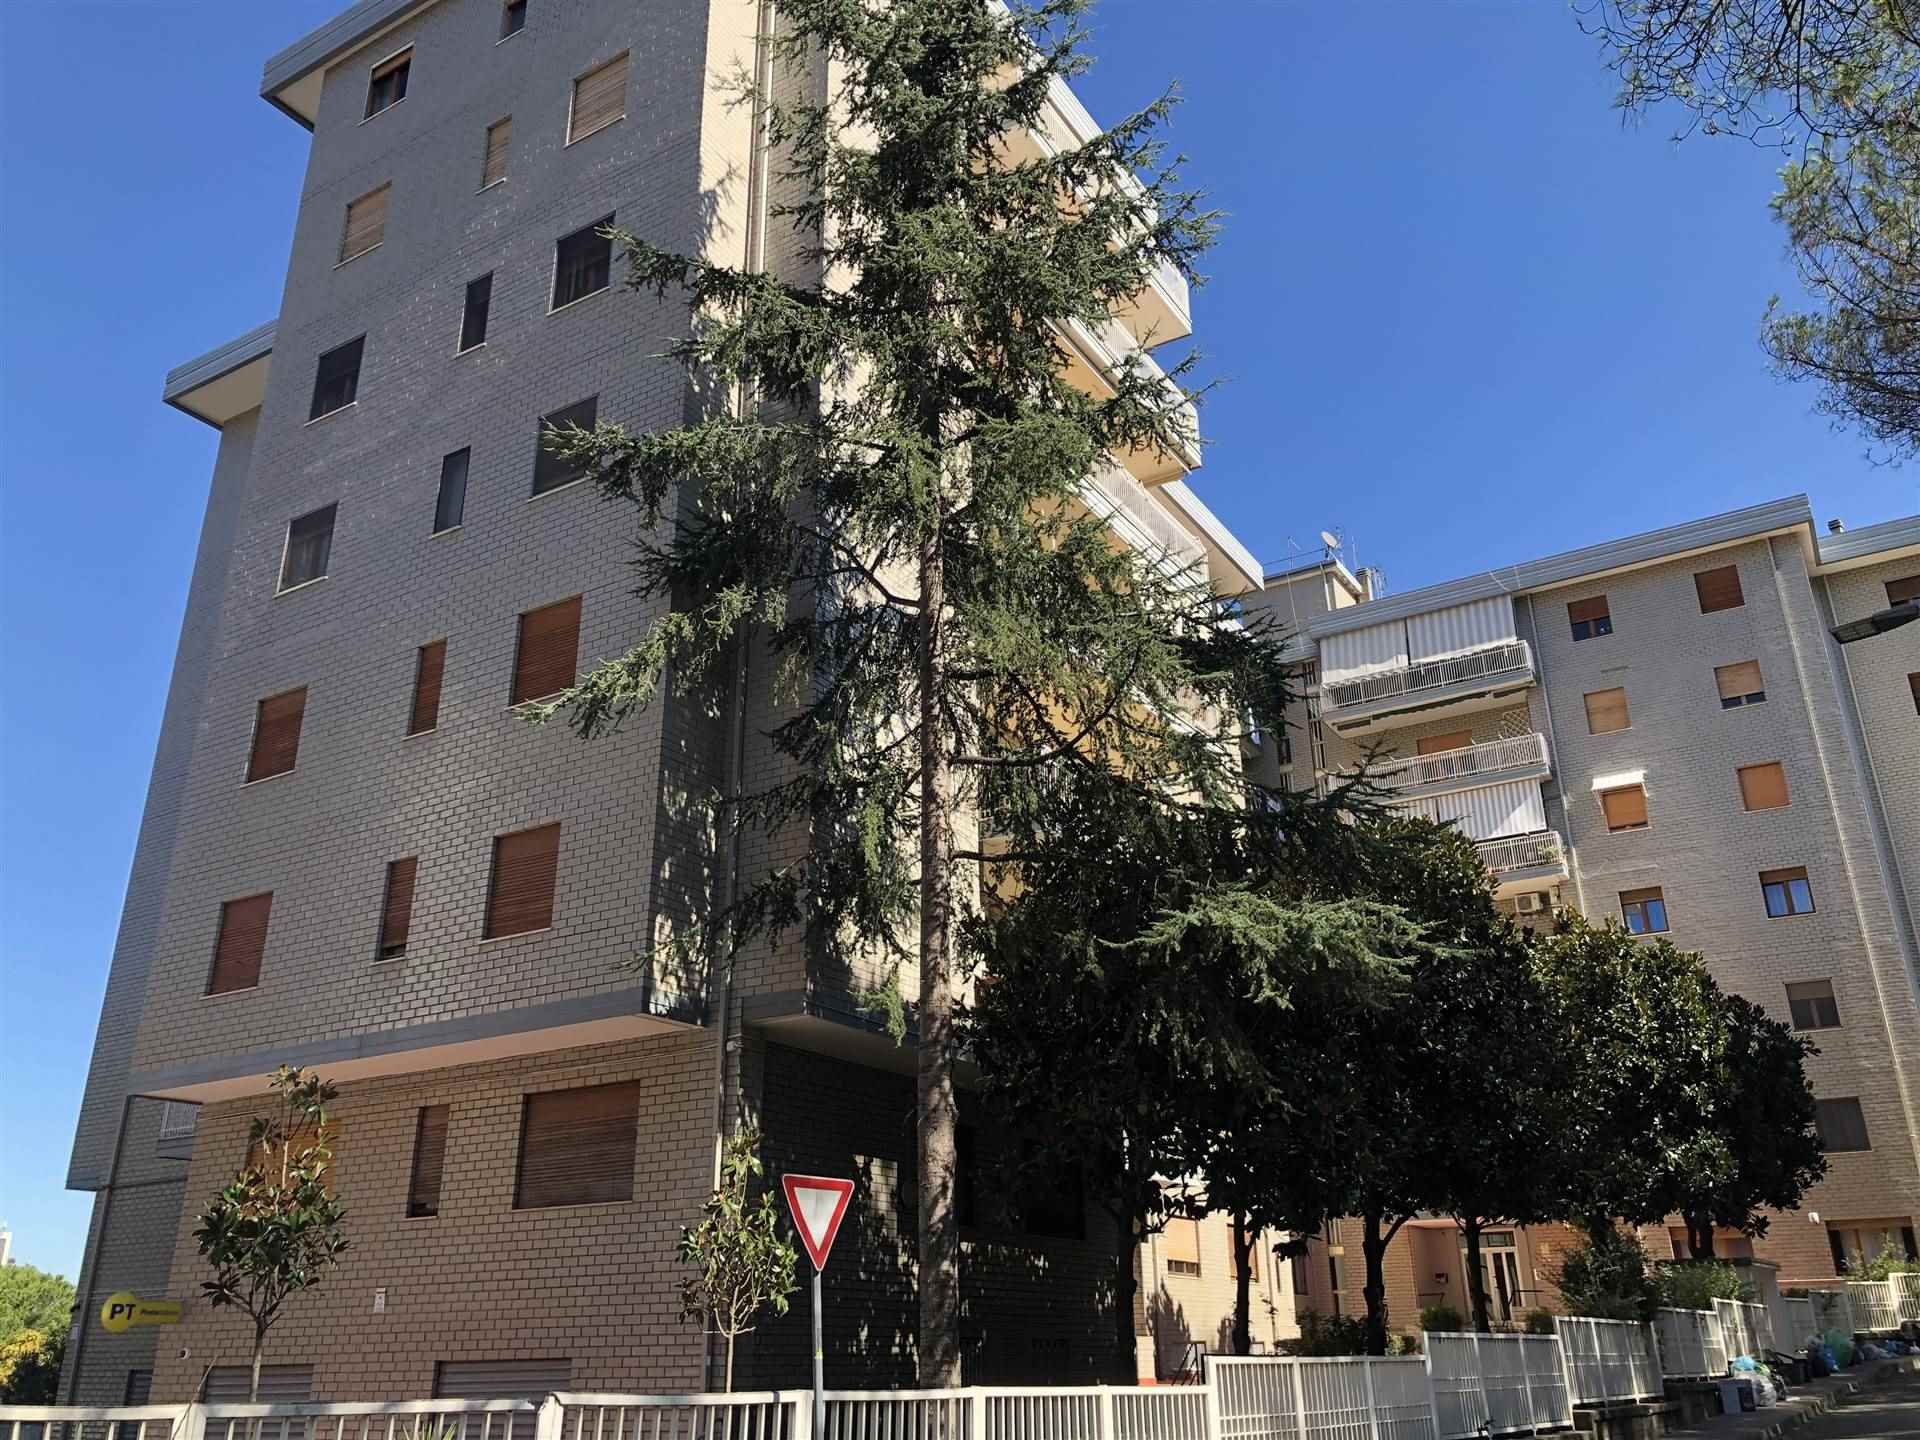 CITTÀ 2000, COSENZA, Apartment for sale of 150 Sq. mt., Excellent Condition, Heating Individual heating system, Energetic class: G, placed at 1° on 6,